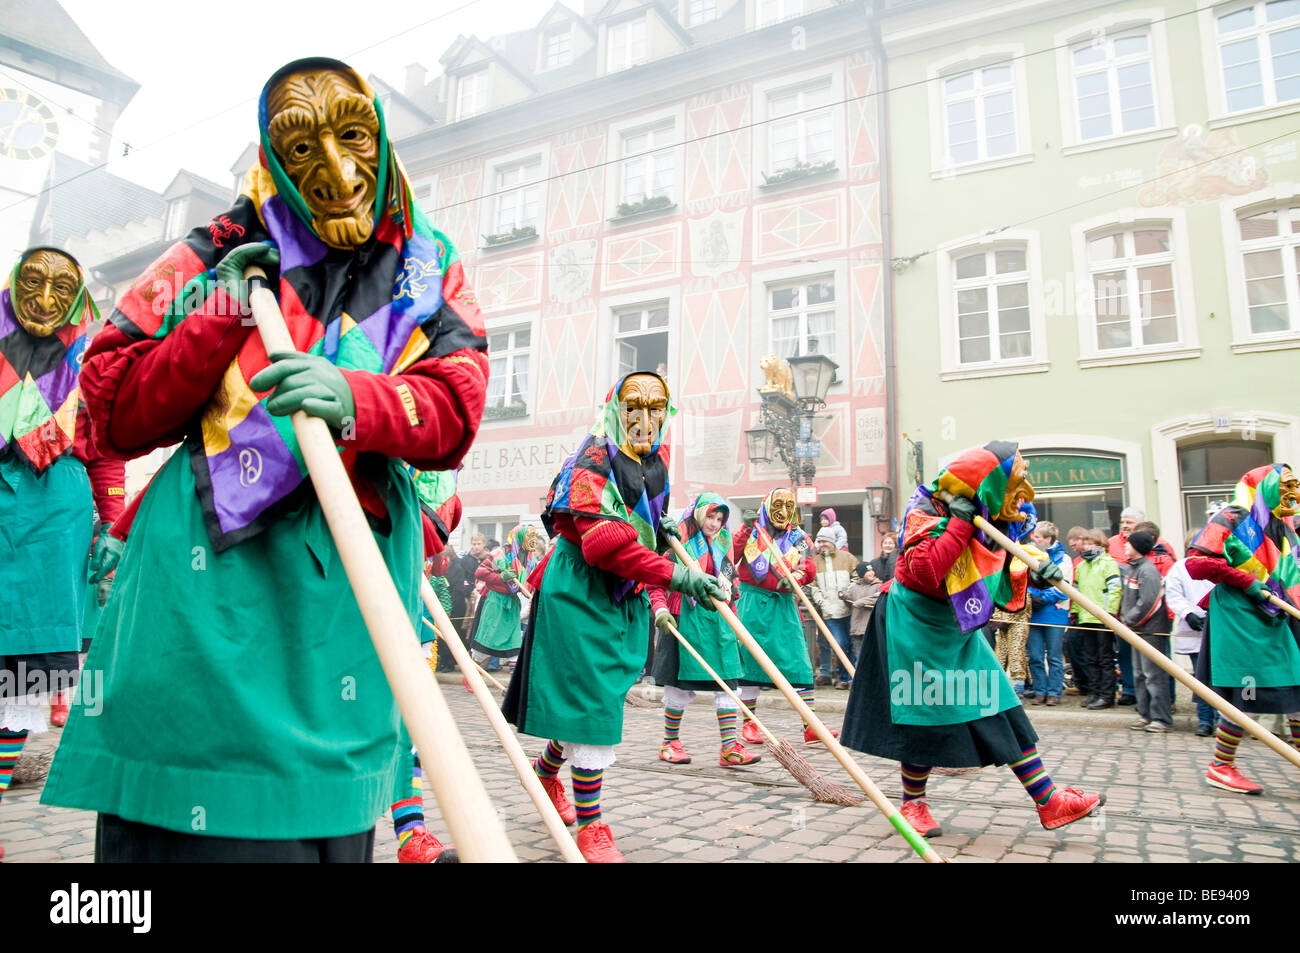 Freiburg Costume High Resolution Stock Photography and Images - Alamy